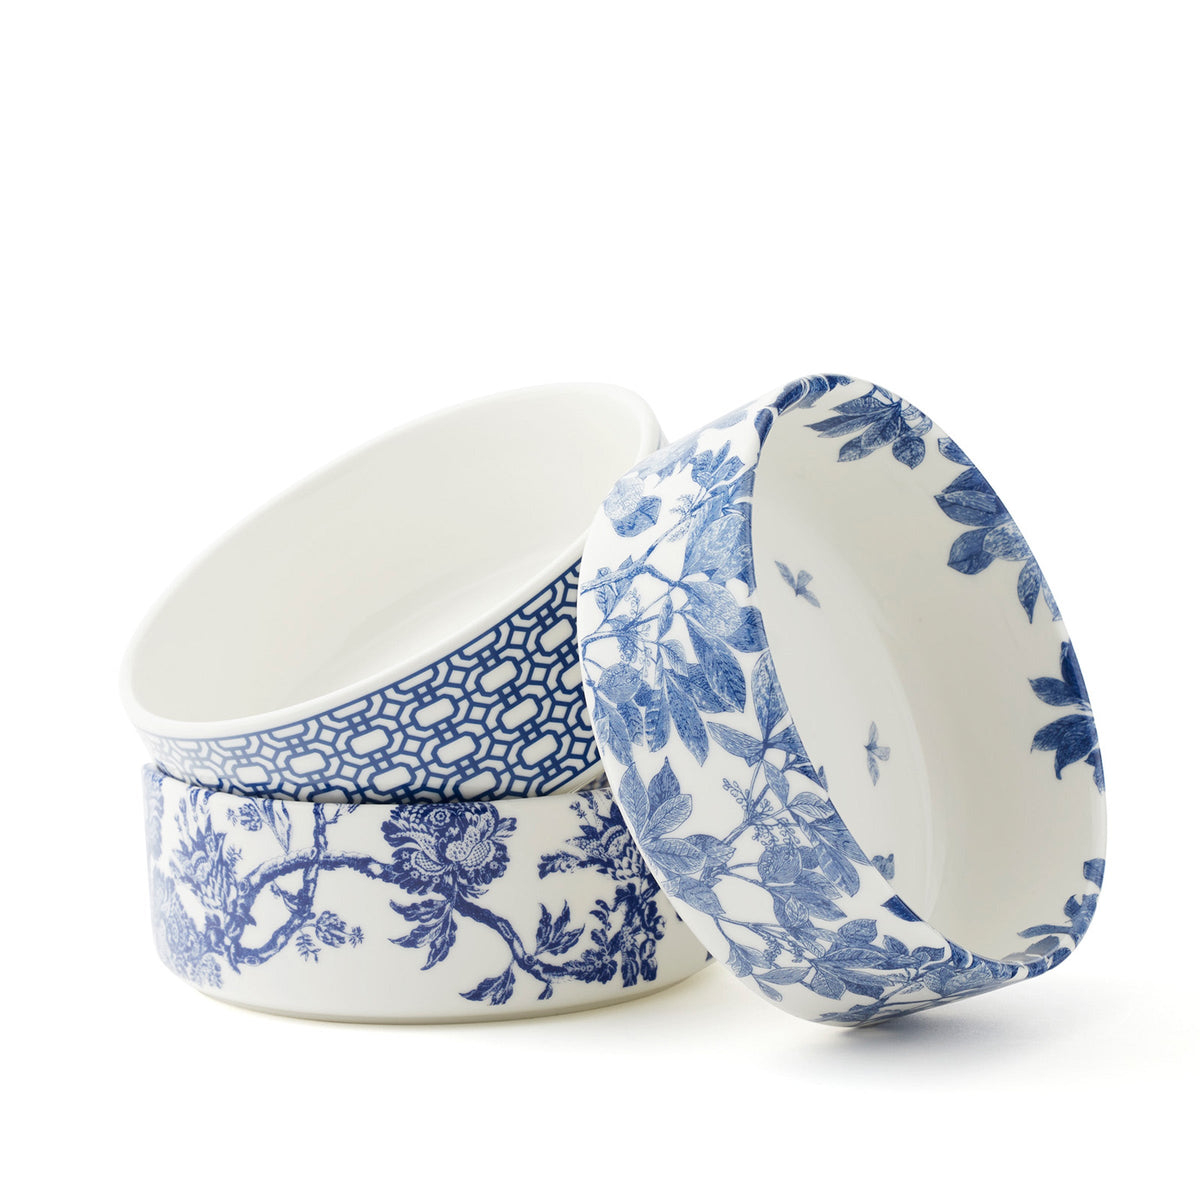 Stack of three large blue and white porcelain pet bowls in Arbor, Arcadia, and Newport Garden Gate patterns, by Caskata.